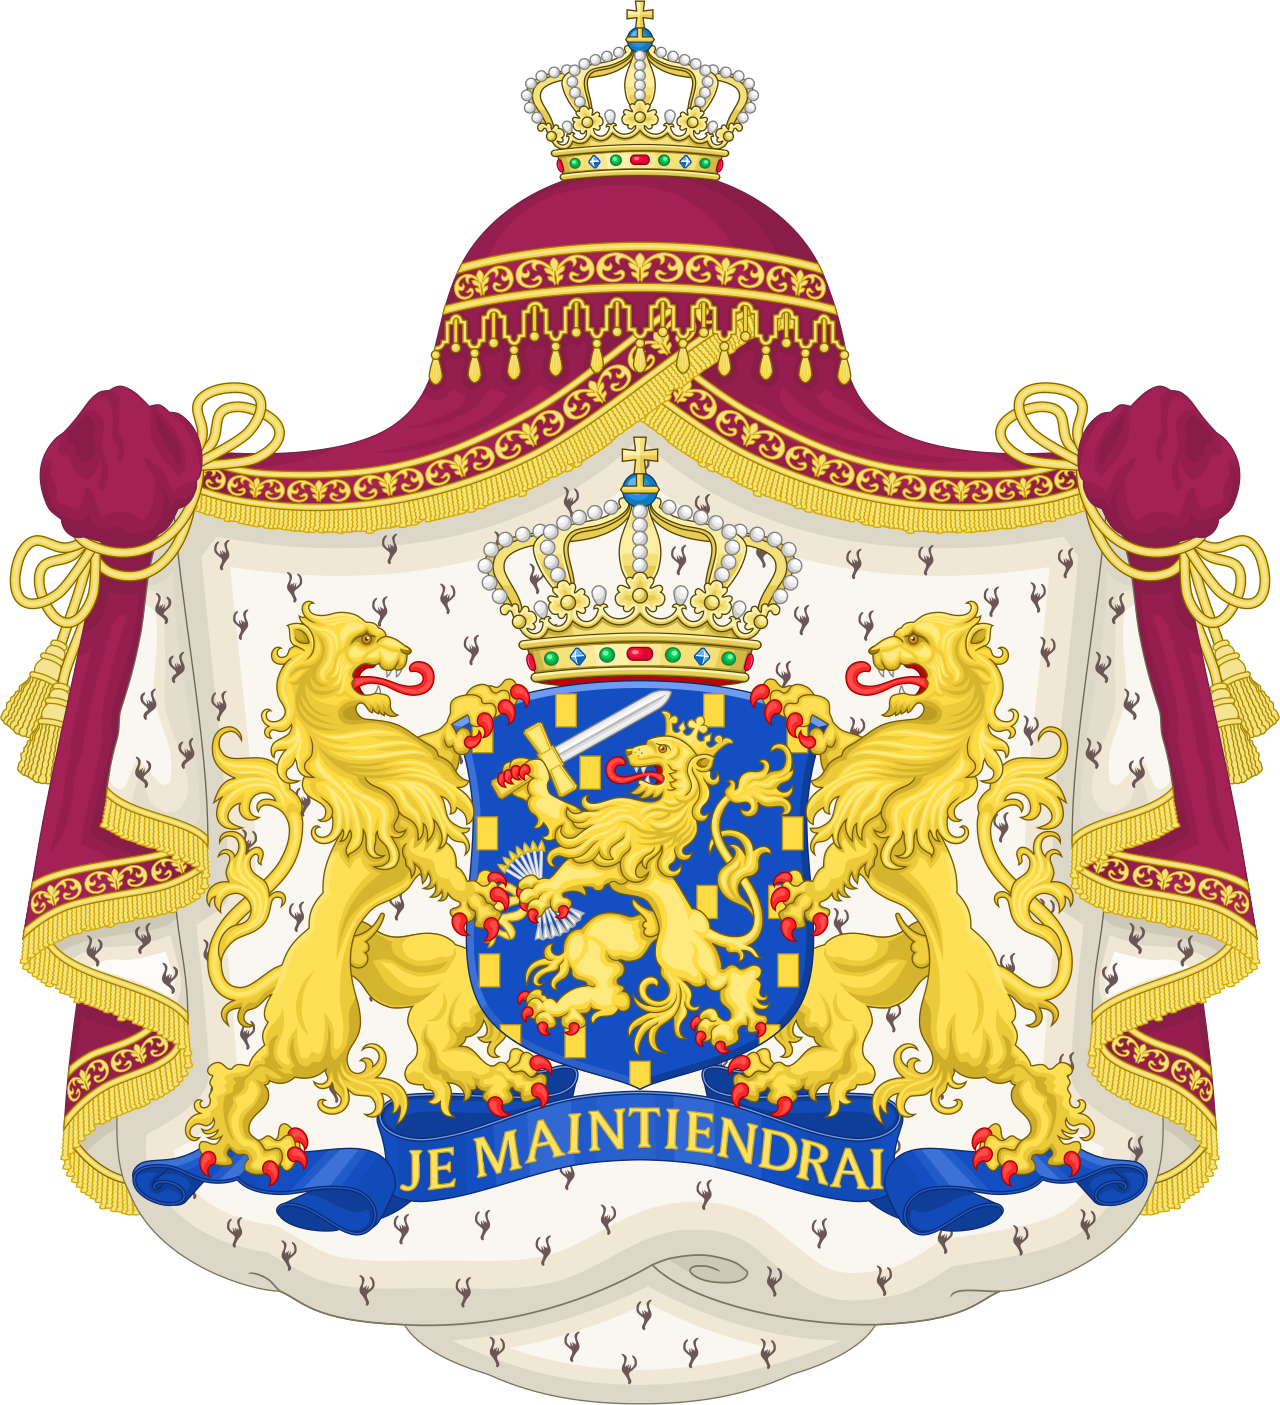 Name:  1280px-Royal_coat_of_arms_of_the_Netherlands.svg.png
Views: 82
Size:  1.29 MB